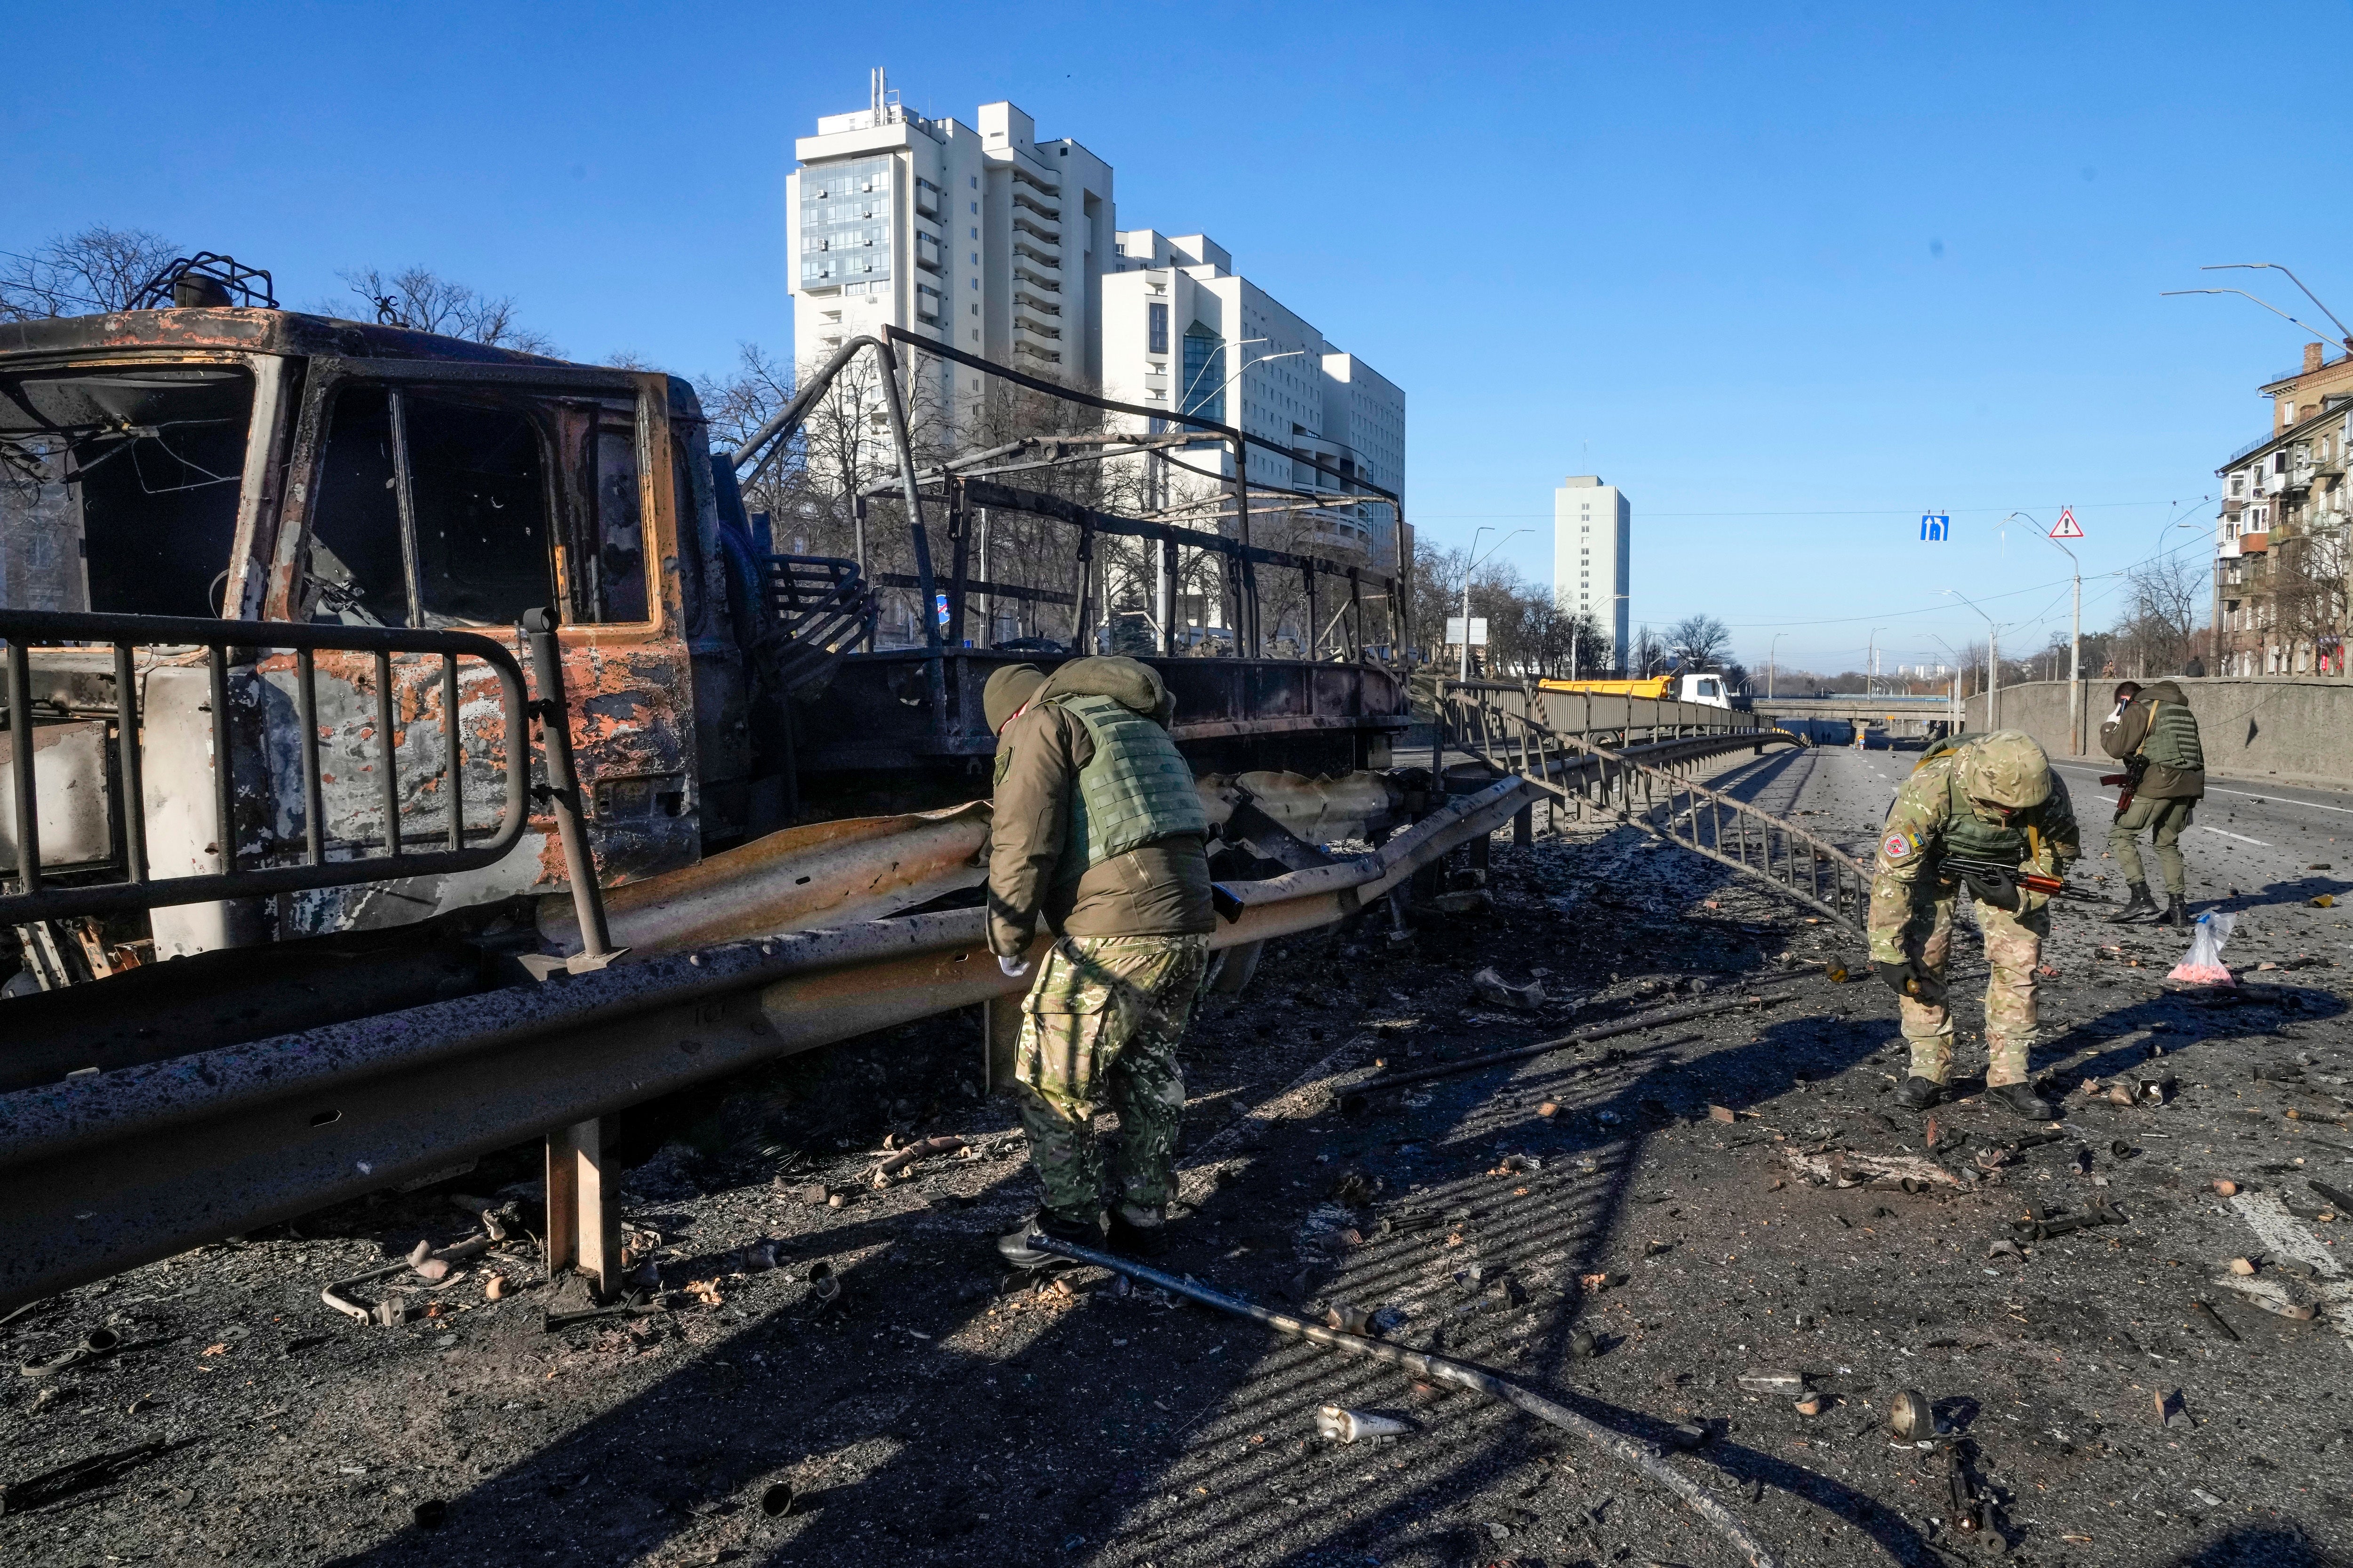 Ukrainian soldiers investigate debris of a burning military truck on a street in Kyiv